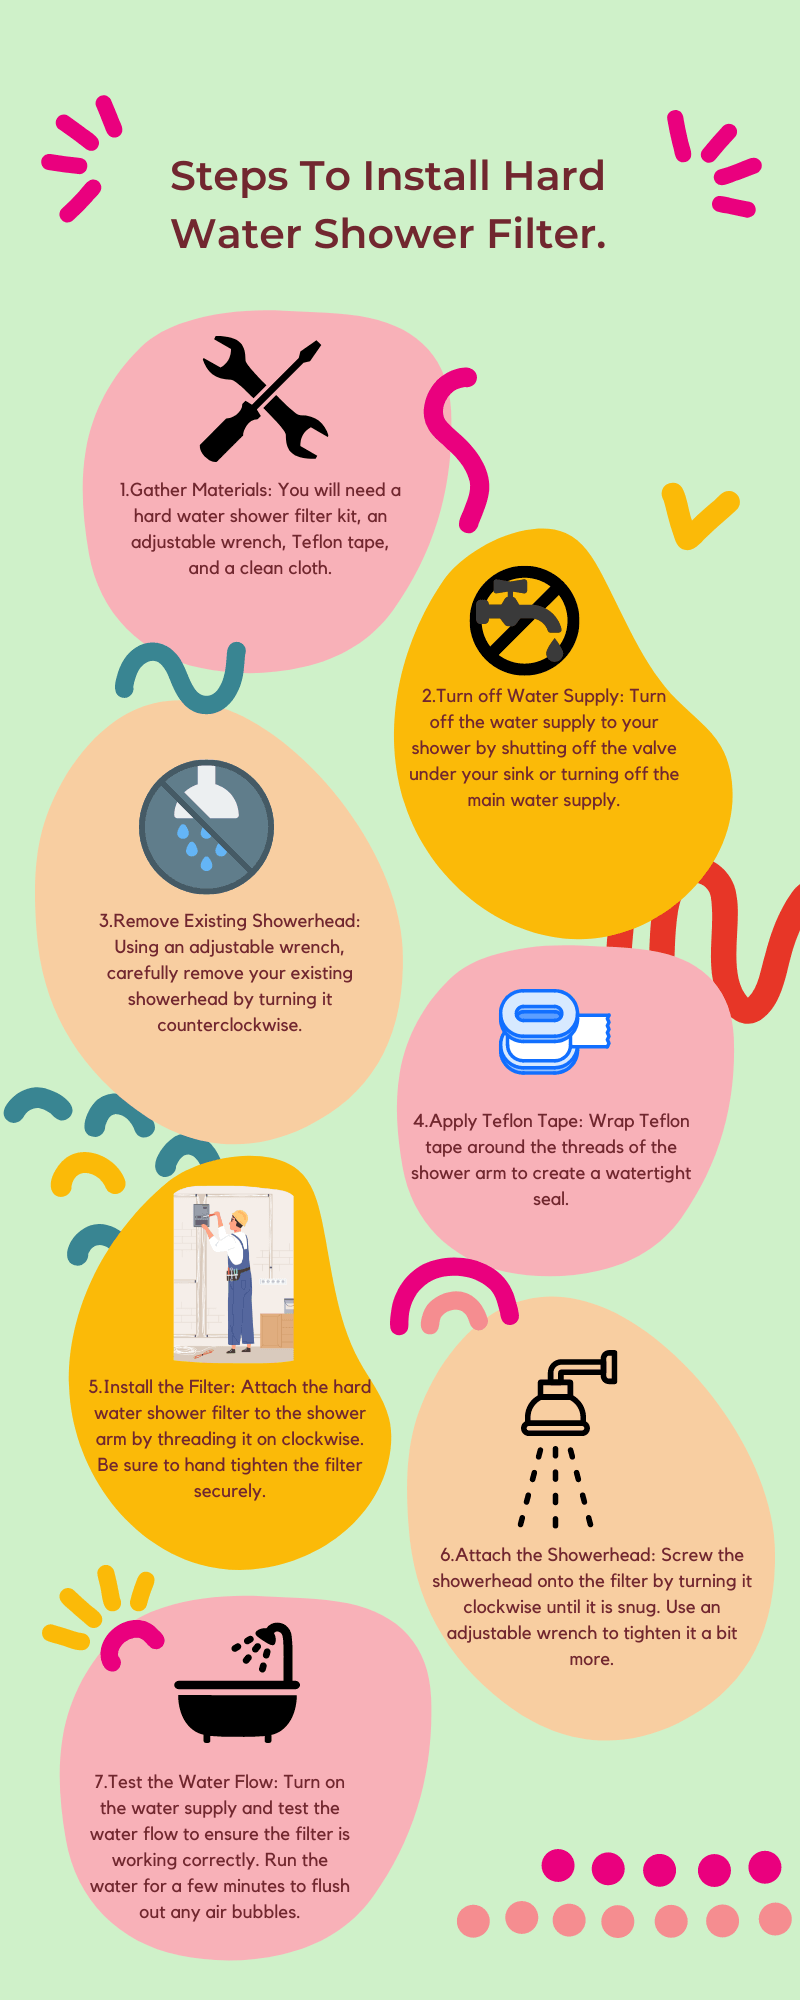 Steps To Install Hard Water Shower Filter - infographic